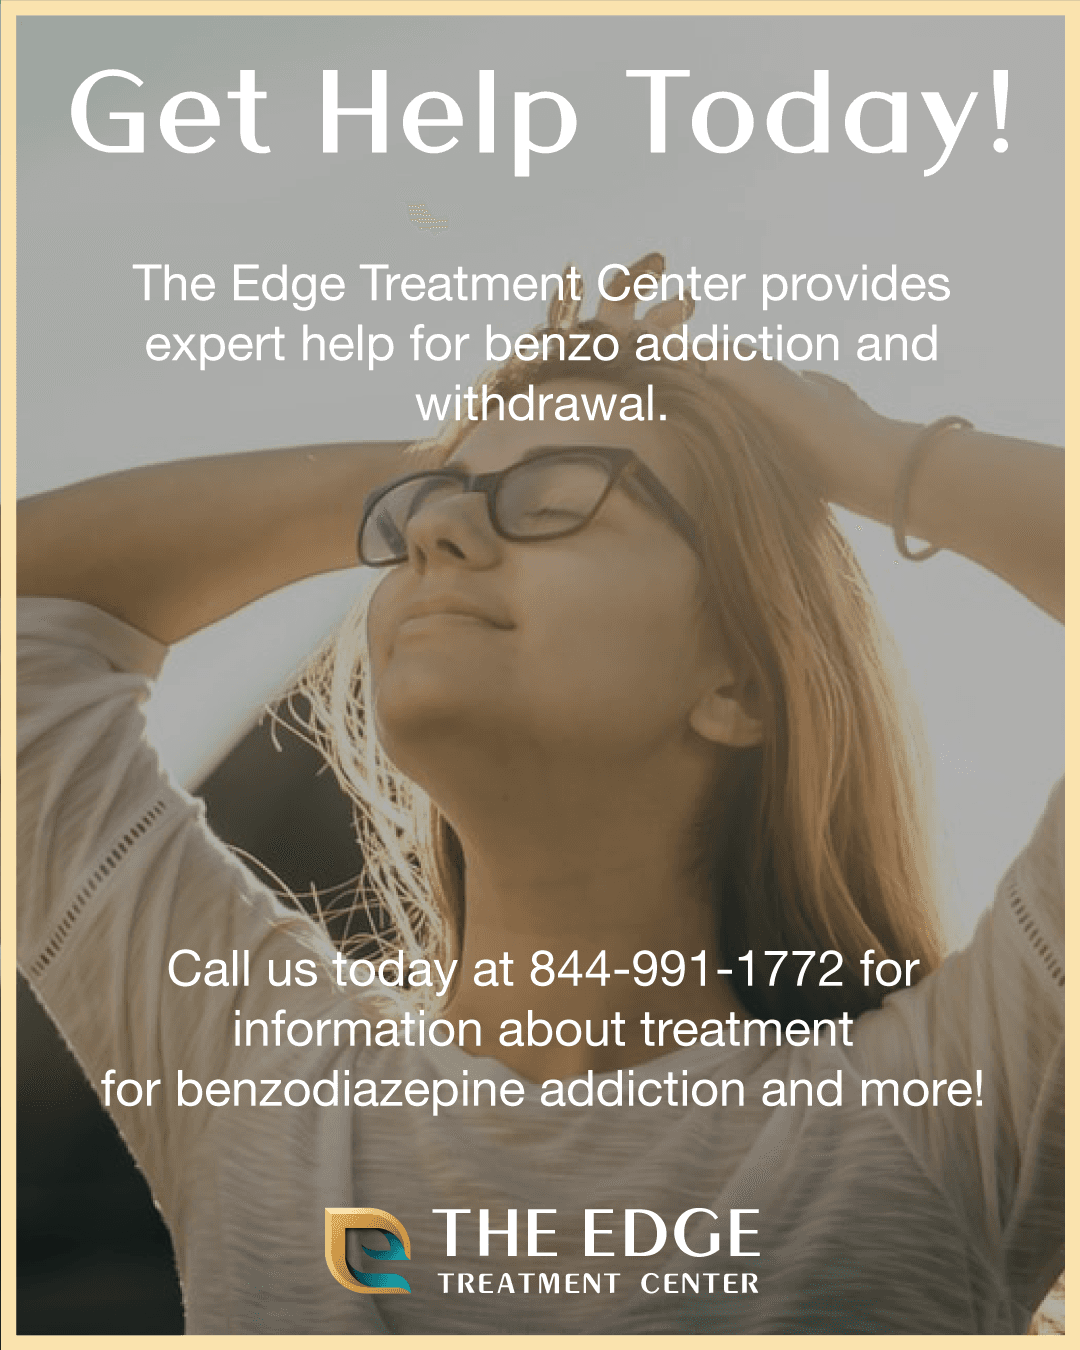 Get Help for Benzo Addiction Today